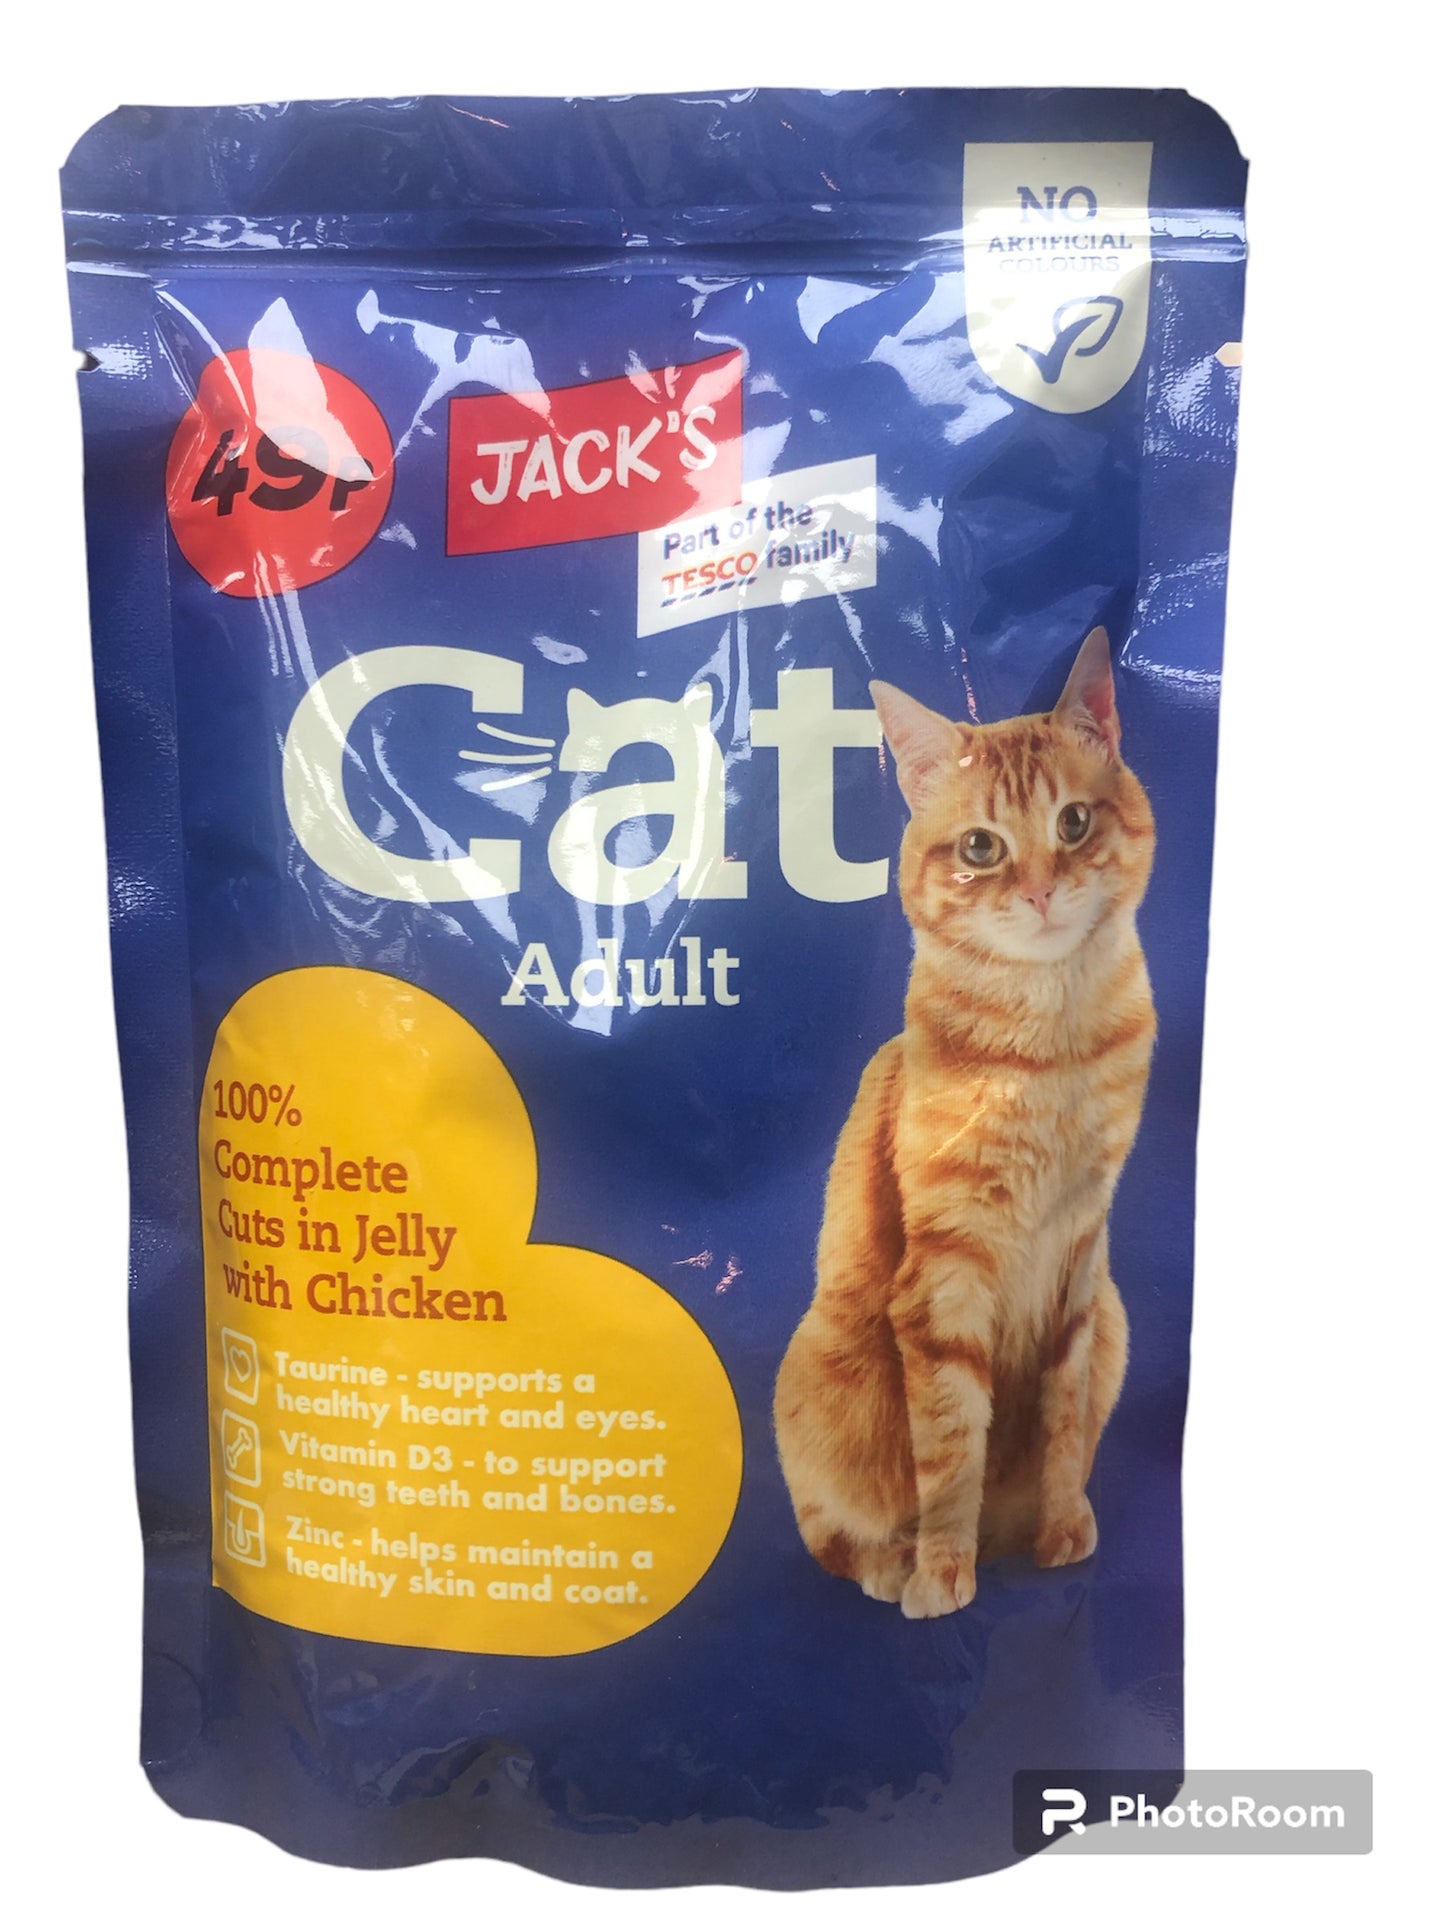 Jacks adult cat food 100% complete cuts in jelly with chicken 100g